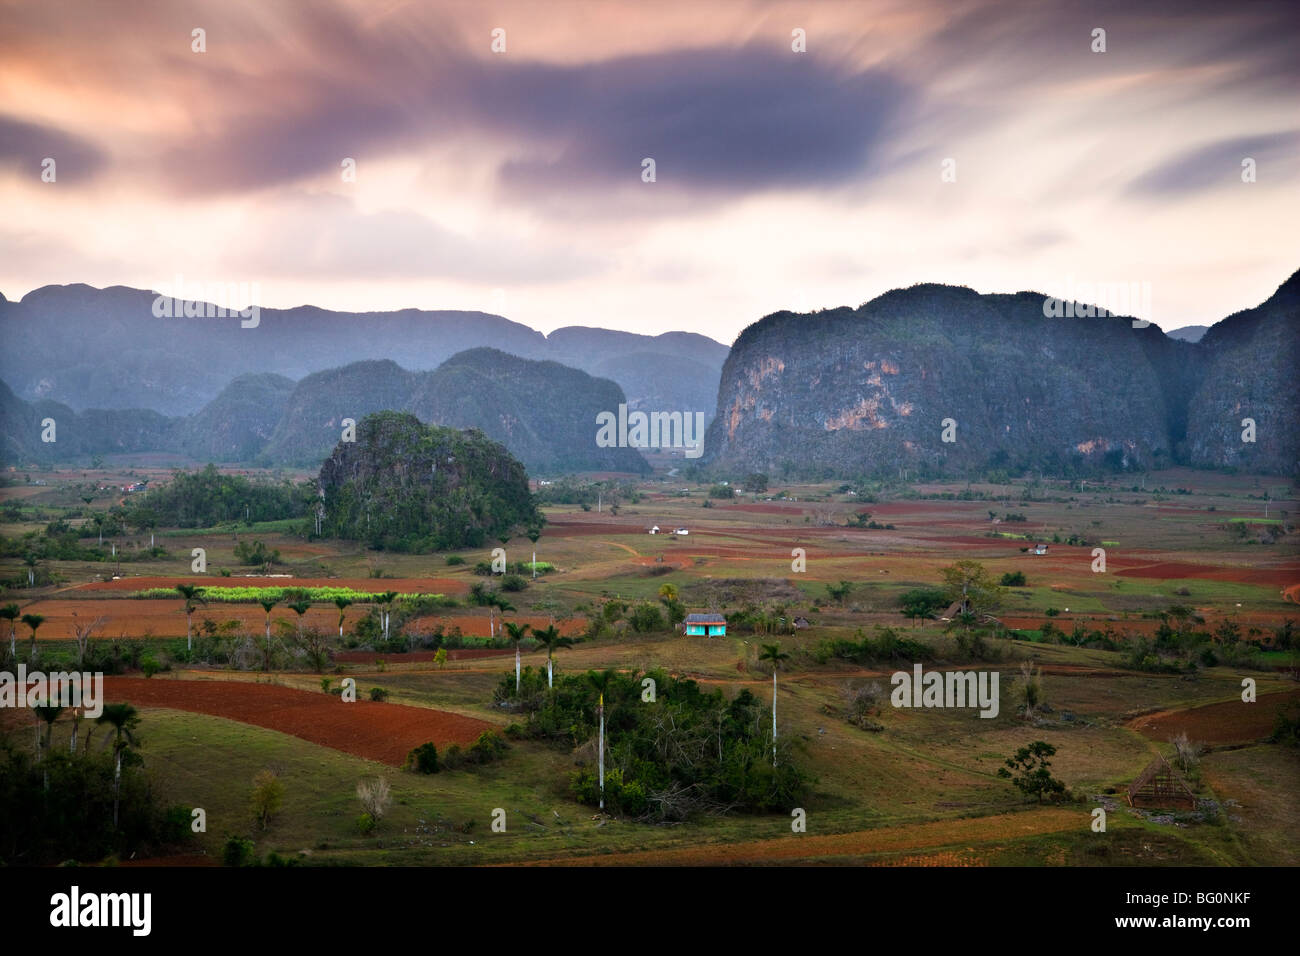 Dusk view across Vinales Valley showing limestone hills known as Mogotes, Vinales, UNESCO World Heritage Site, Cuba, West Indies Stock Photo